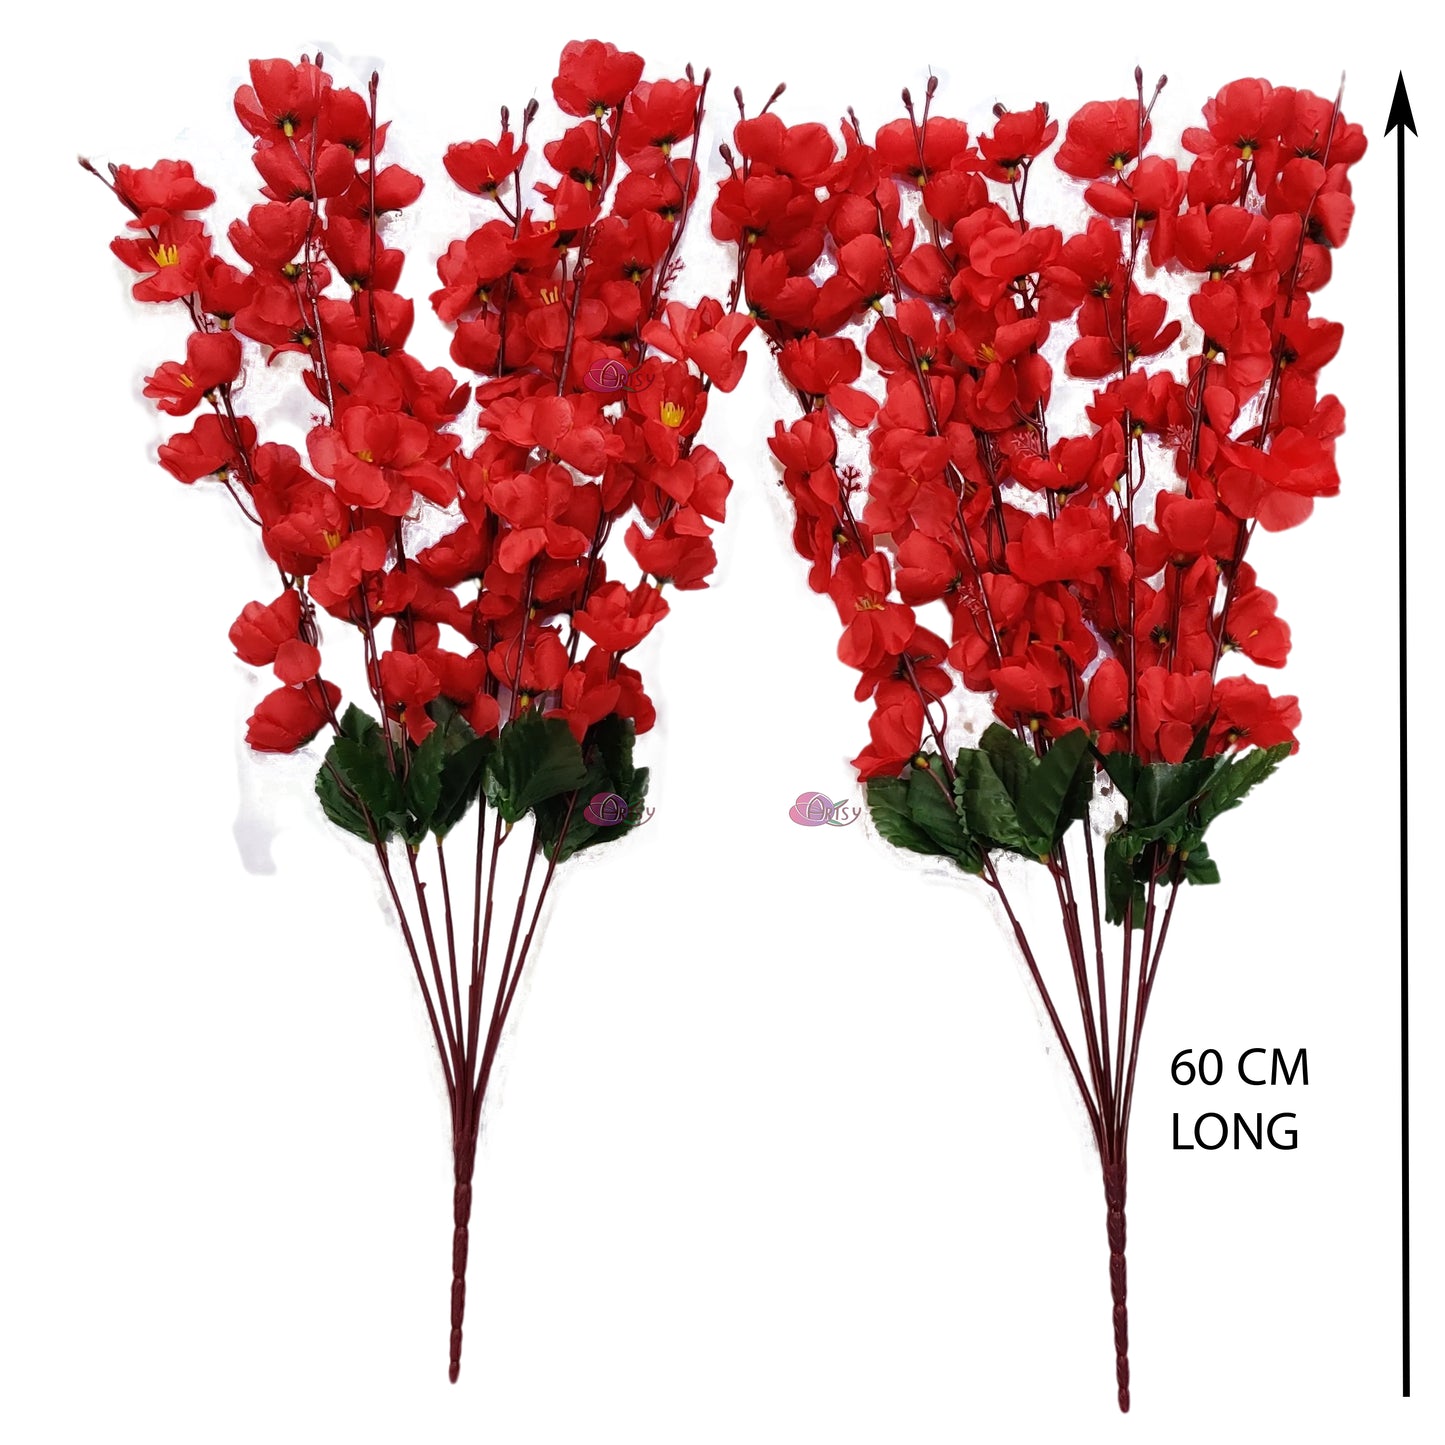 ARTSY® Artificial Flowers Home Decoration Cherry Blossom Flower Bunch, For Vase Office Decor | Without vase | Combo Red, Pack of 2 pieces